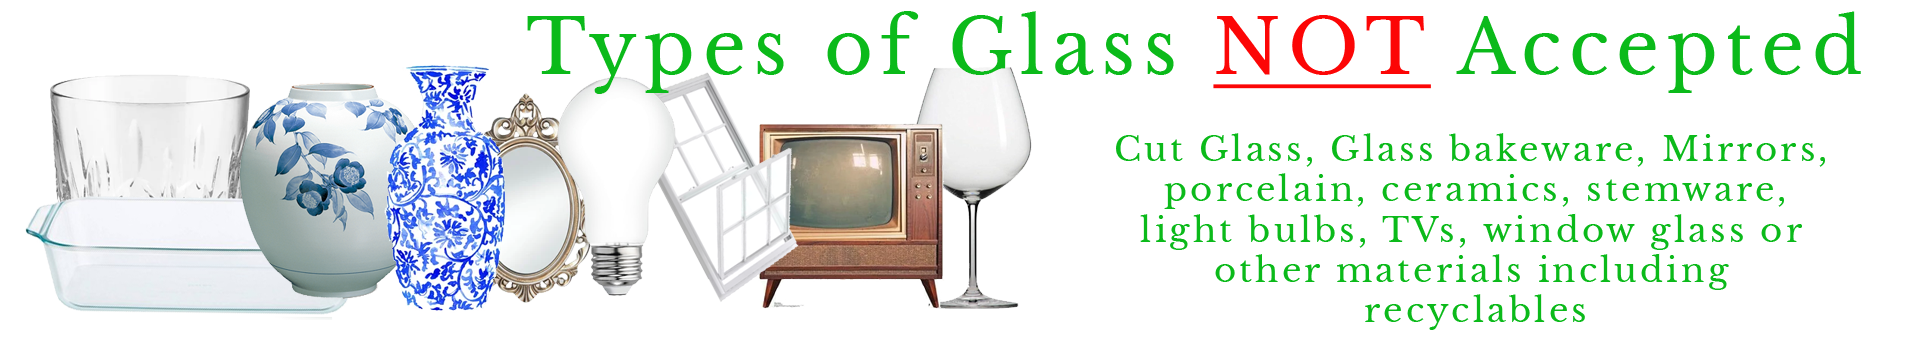 Types of glass not accepted include cut glass, glass bakeware, mirros, porcelain, ceramics, stemware, light bulbs, Tvs, window glass or other materials including recyclables